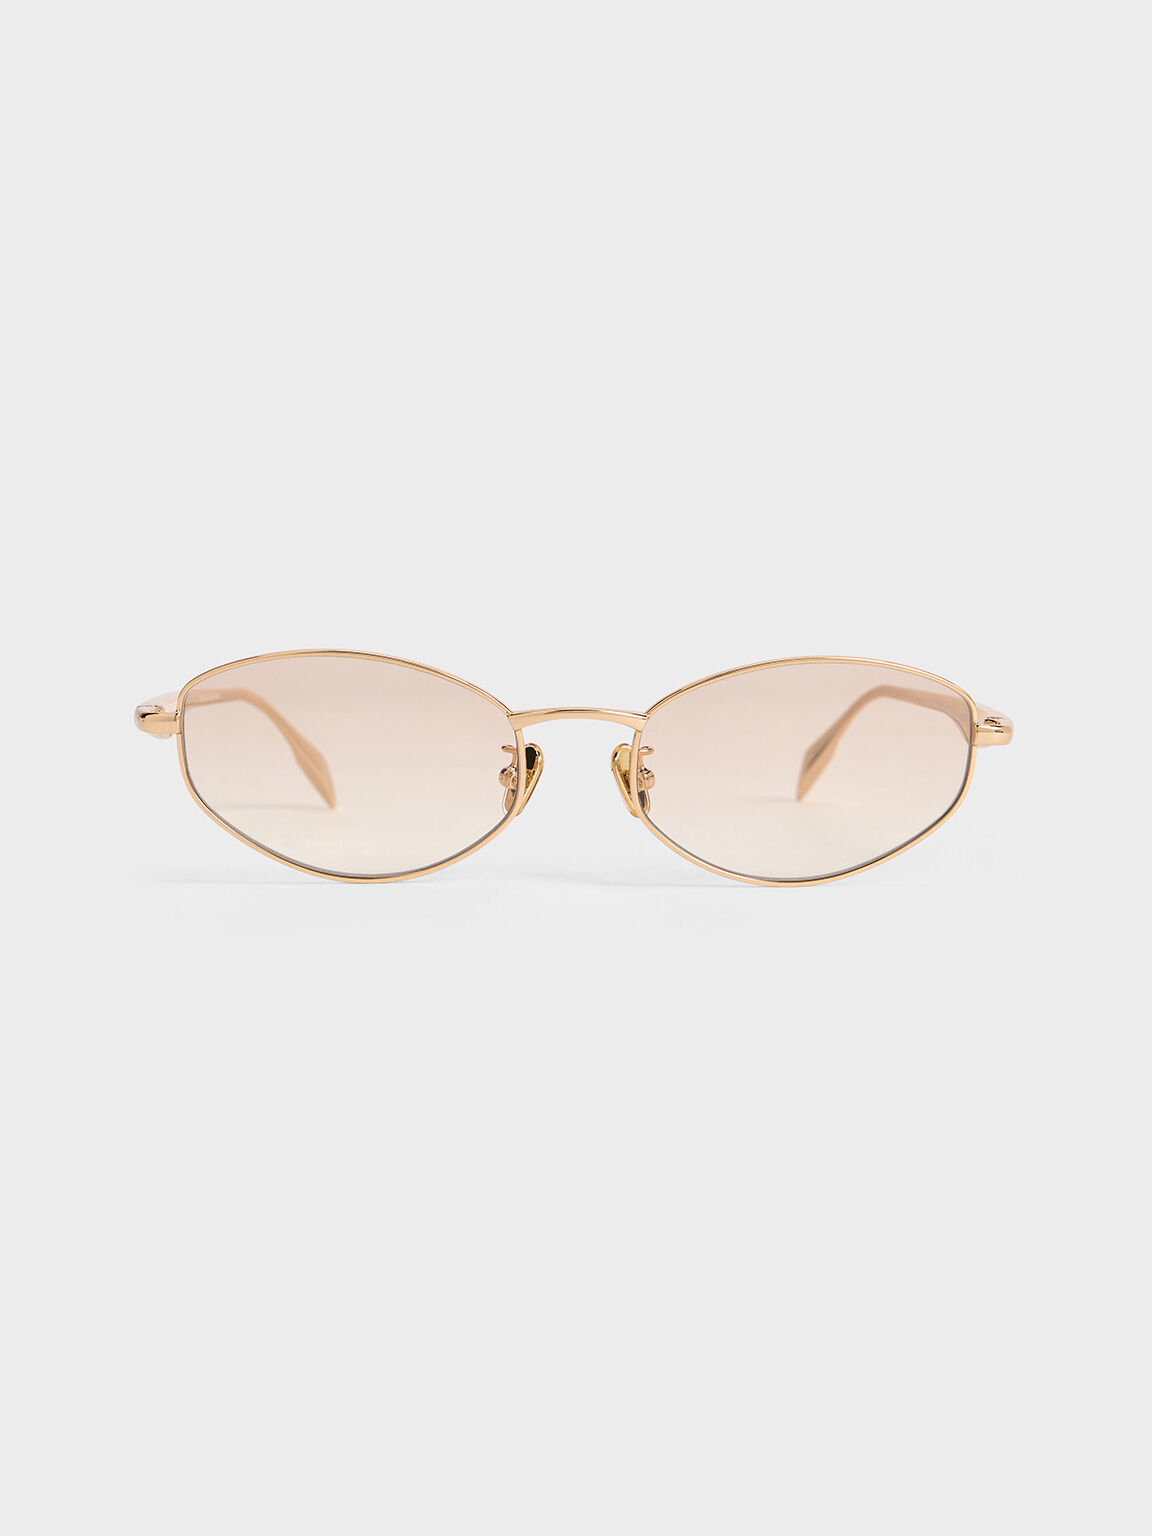 Crystal-Accent Oval Sunglasses, Gold, hi-res